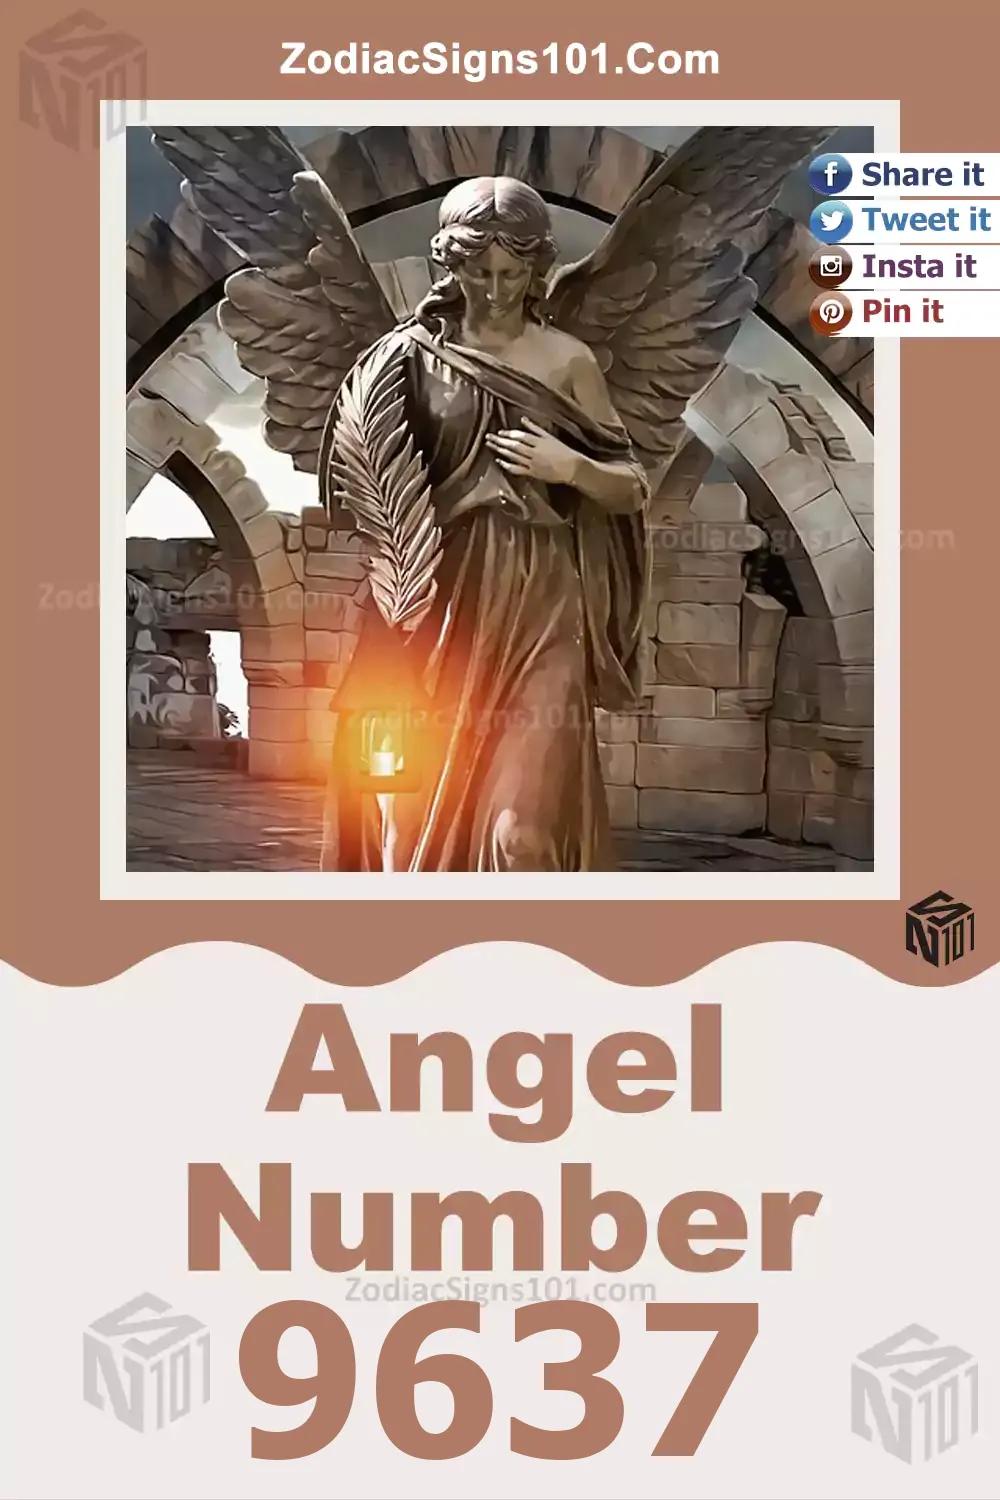 9637 Angel Number Meaning